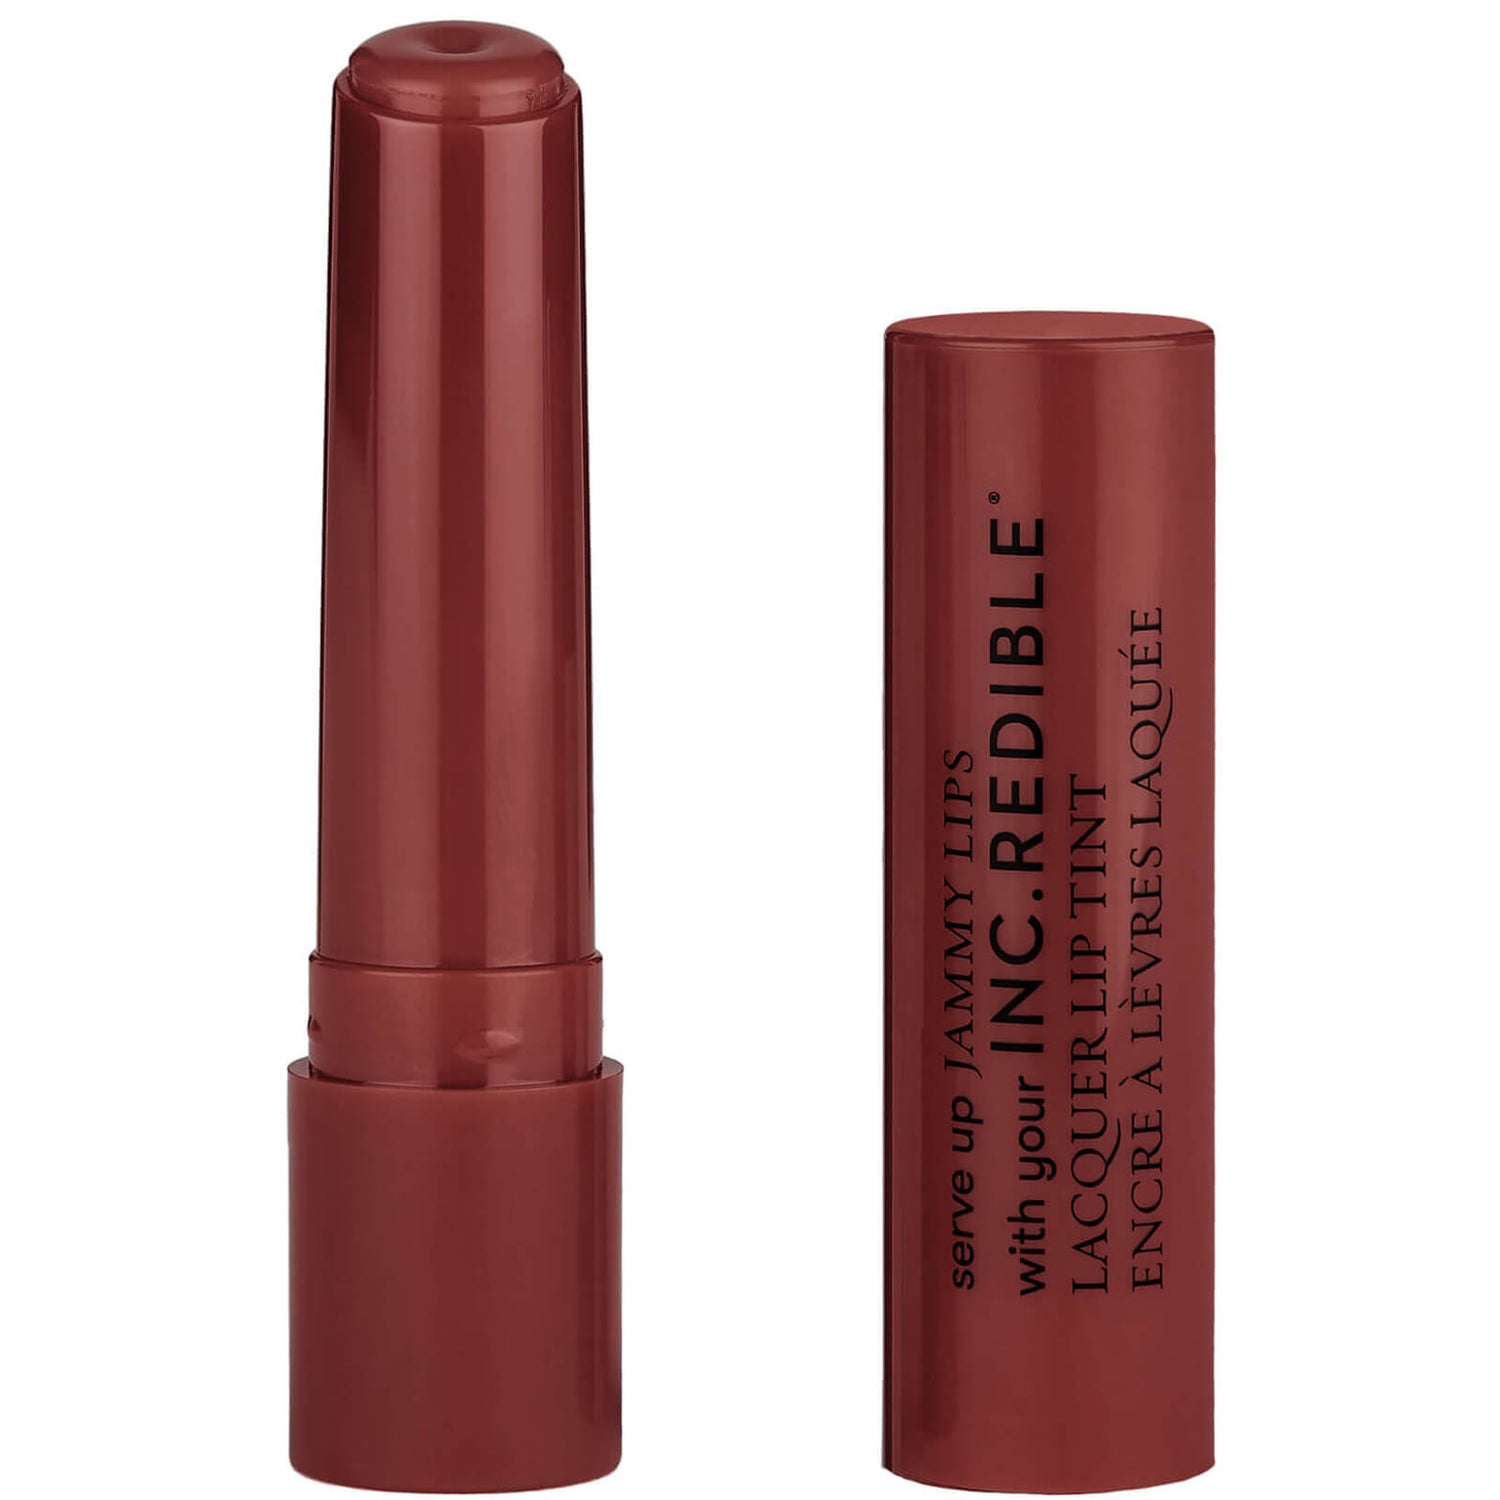 INC.redible Jammy Lips Lacquer Lip Tint - Slow Jamz 2.4g